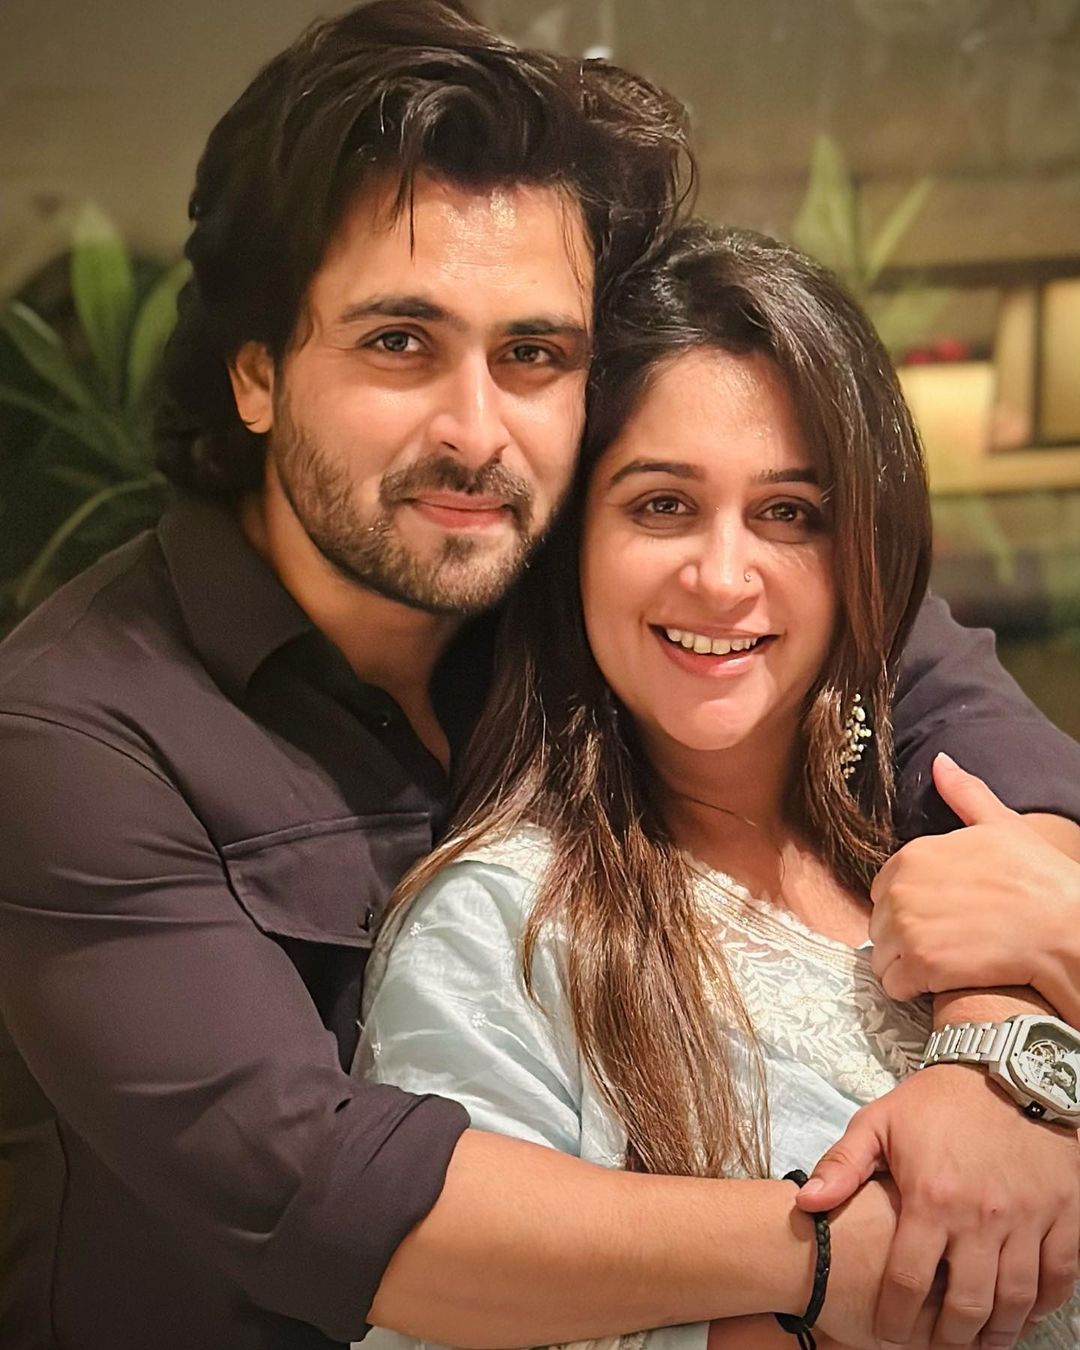 Our Super Hero Shoaib Ibrahim Conveys His Hearty Wishes To His Wife With Gold Earrings! See Here Why She Deserves This Priceless Love From Him!